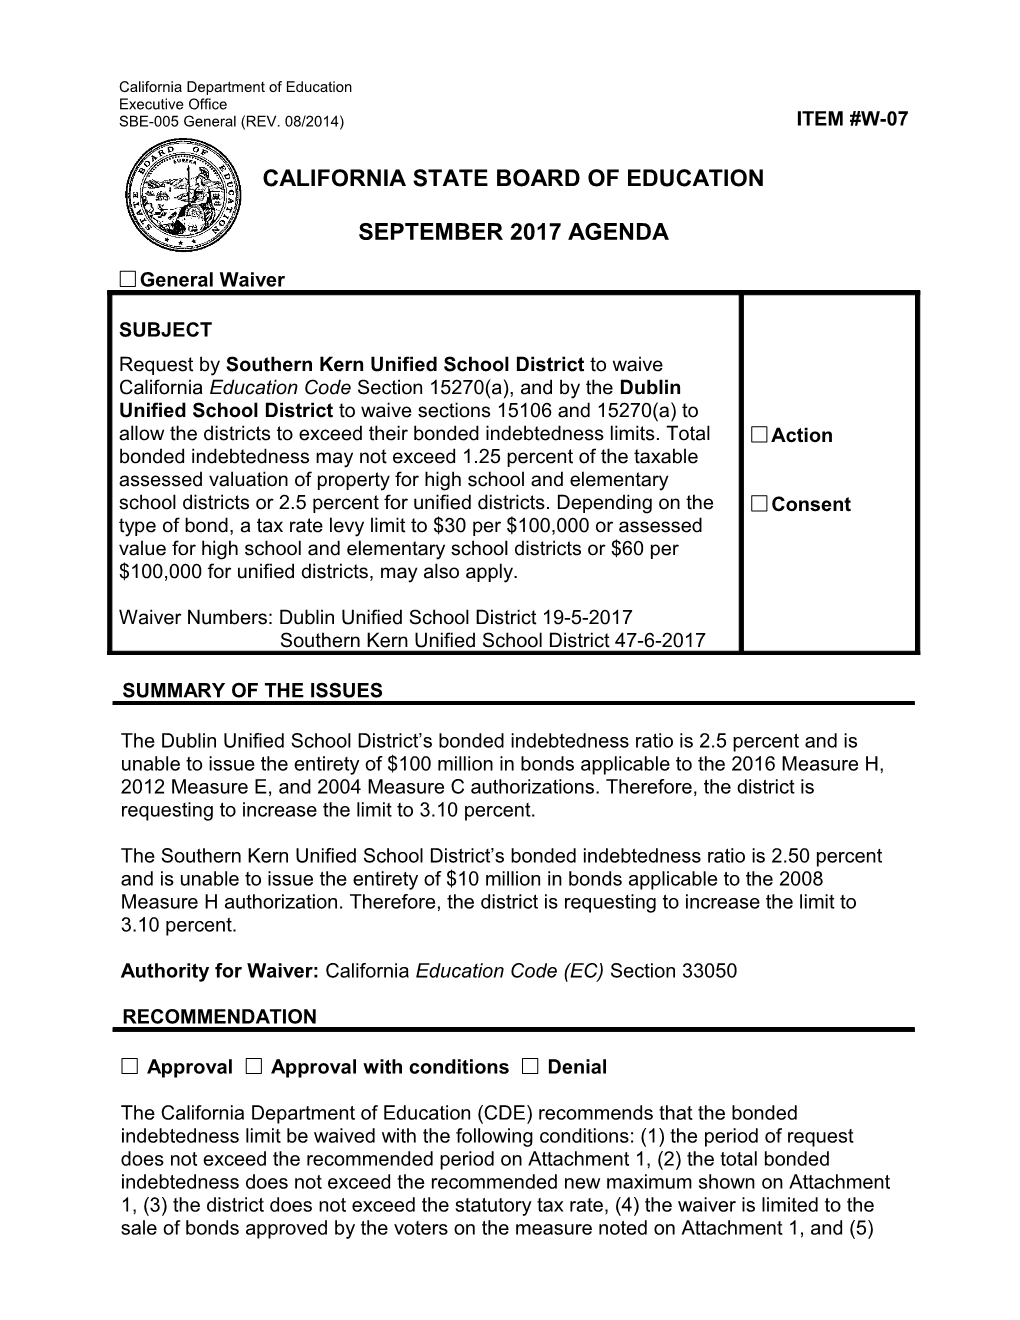 September 2017 Waiver Item W-07 - Meeting Agendas (CA State Board of Education)